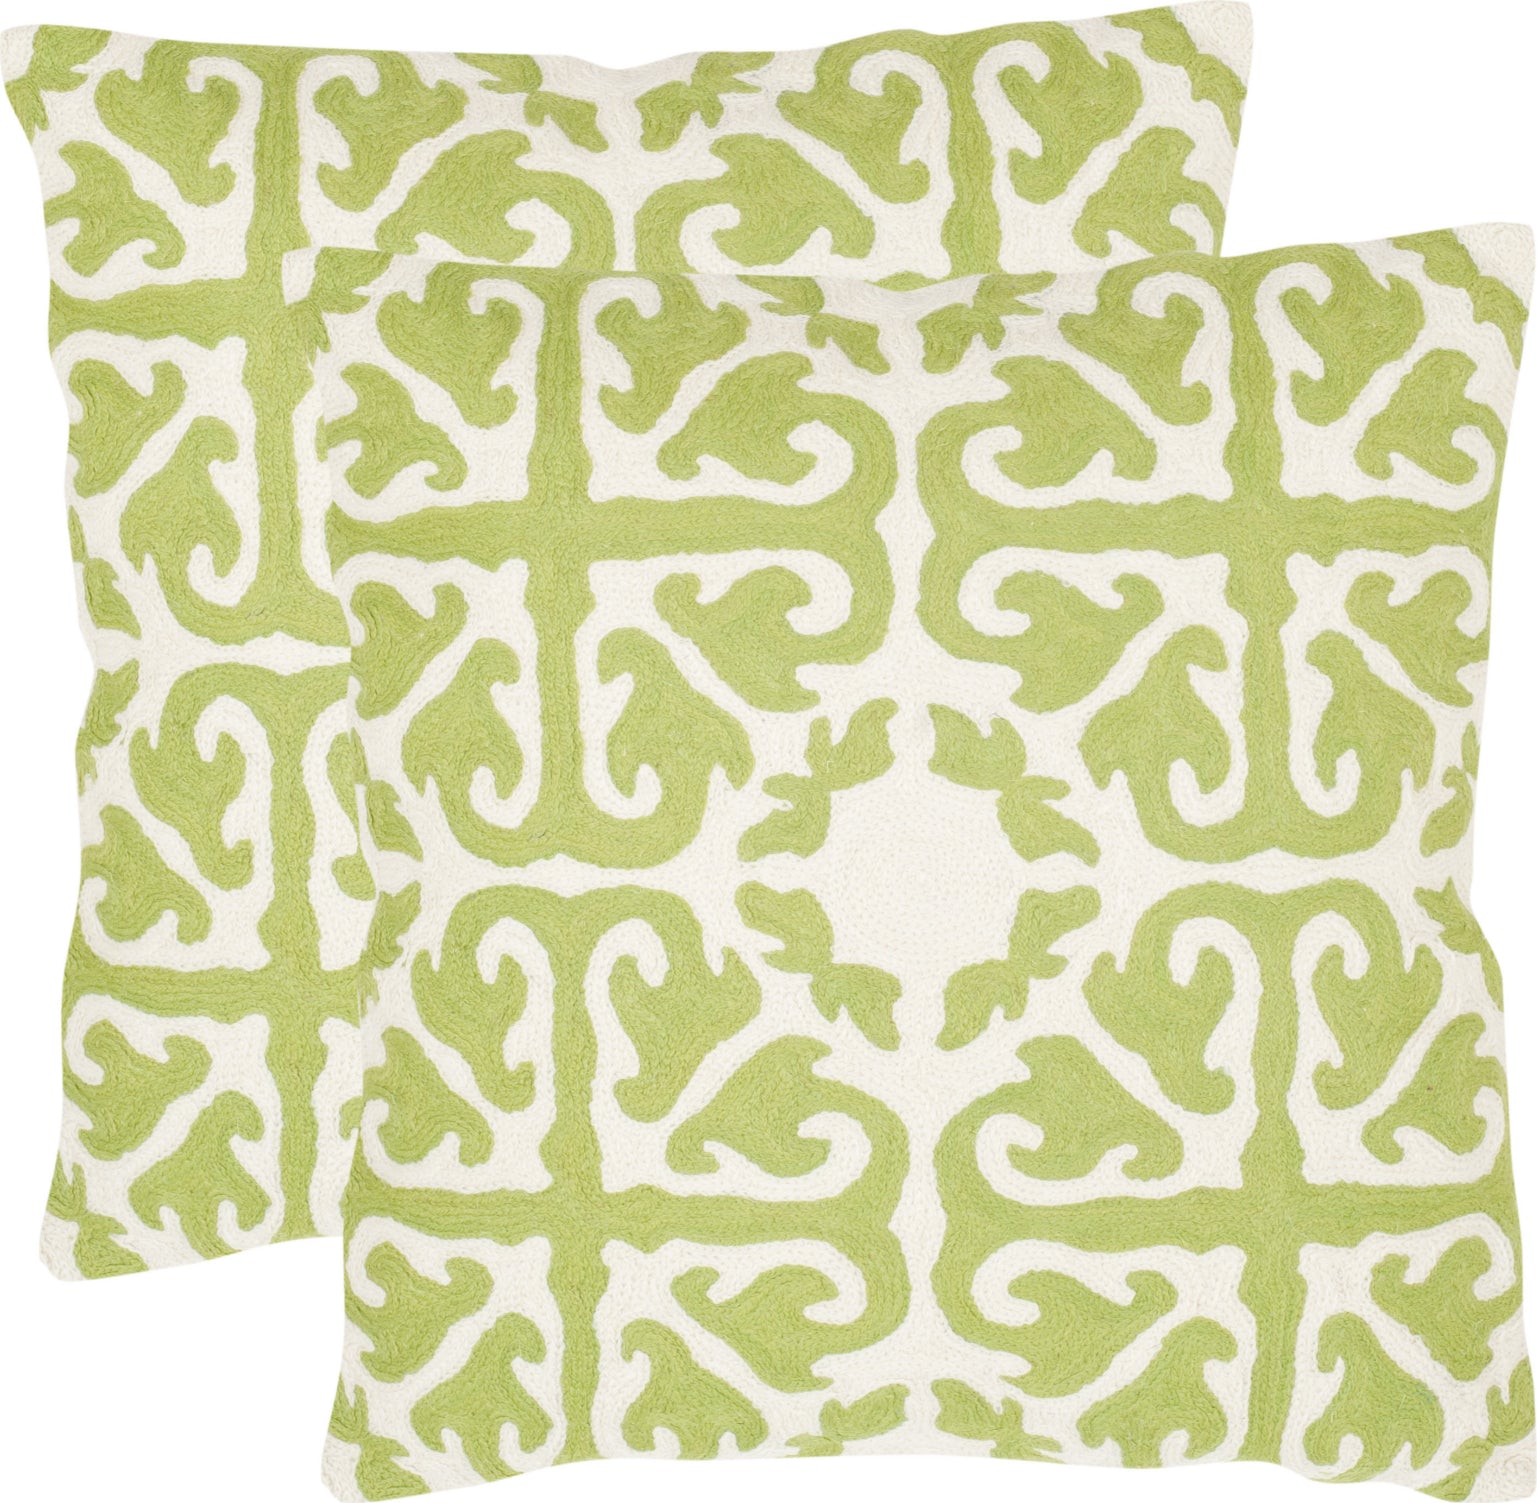 Safavieh Moroccan Chainstitch Lime Green main image